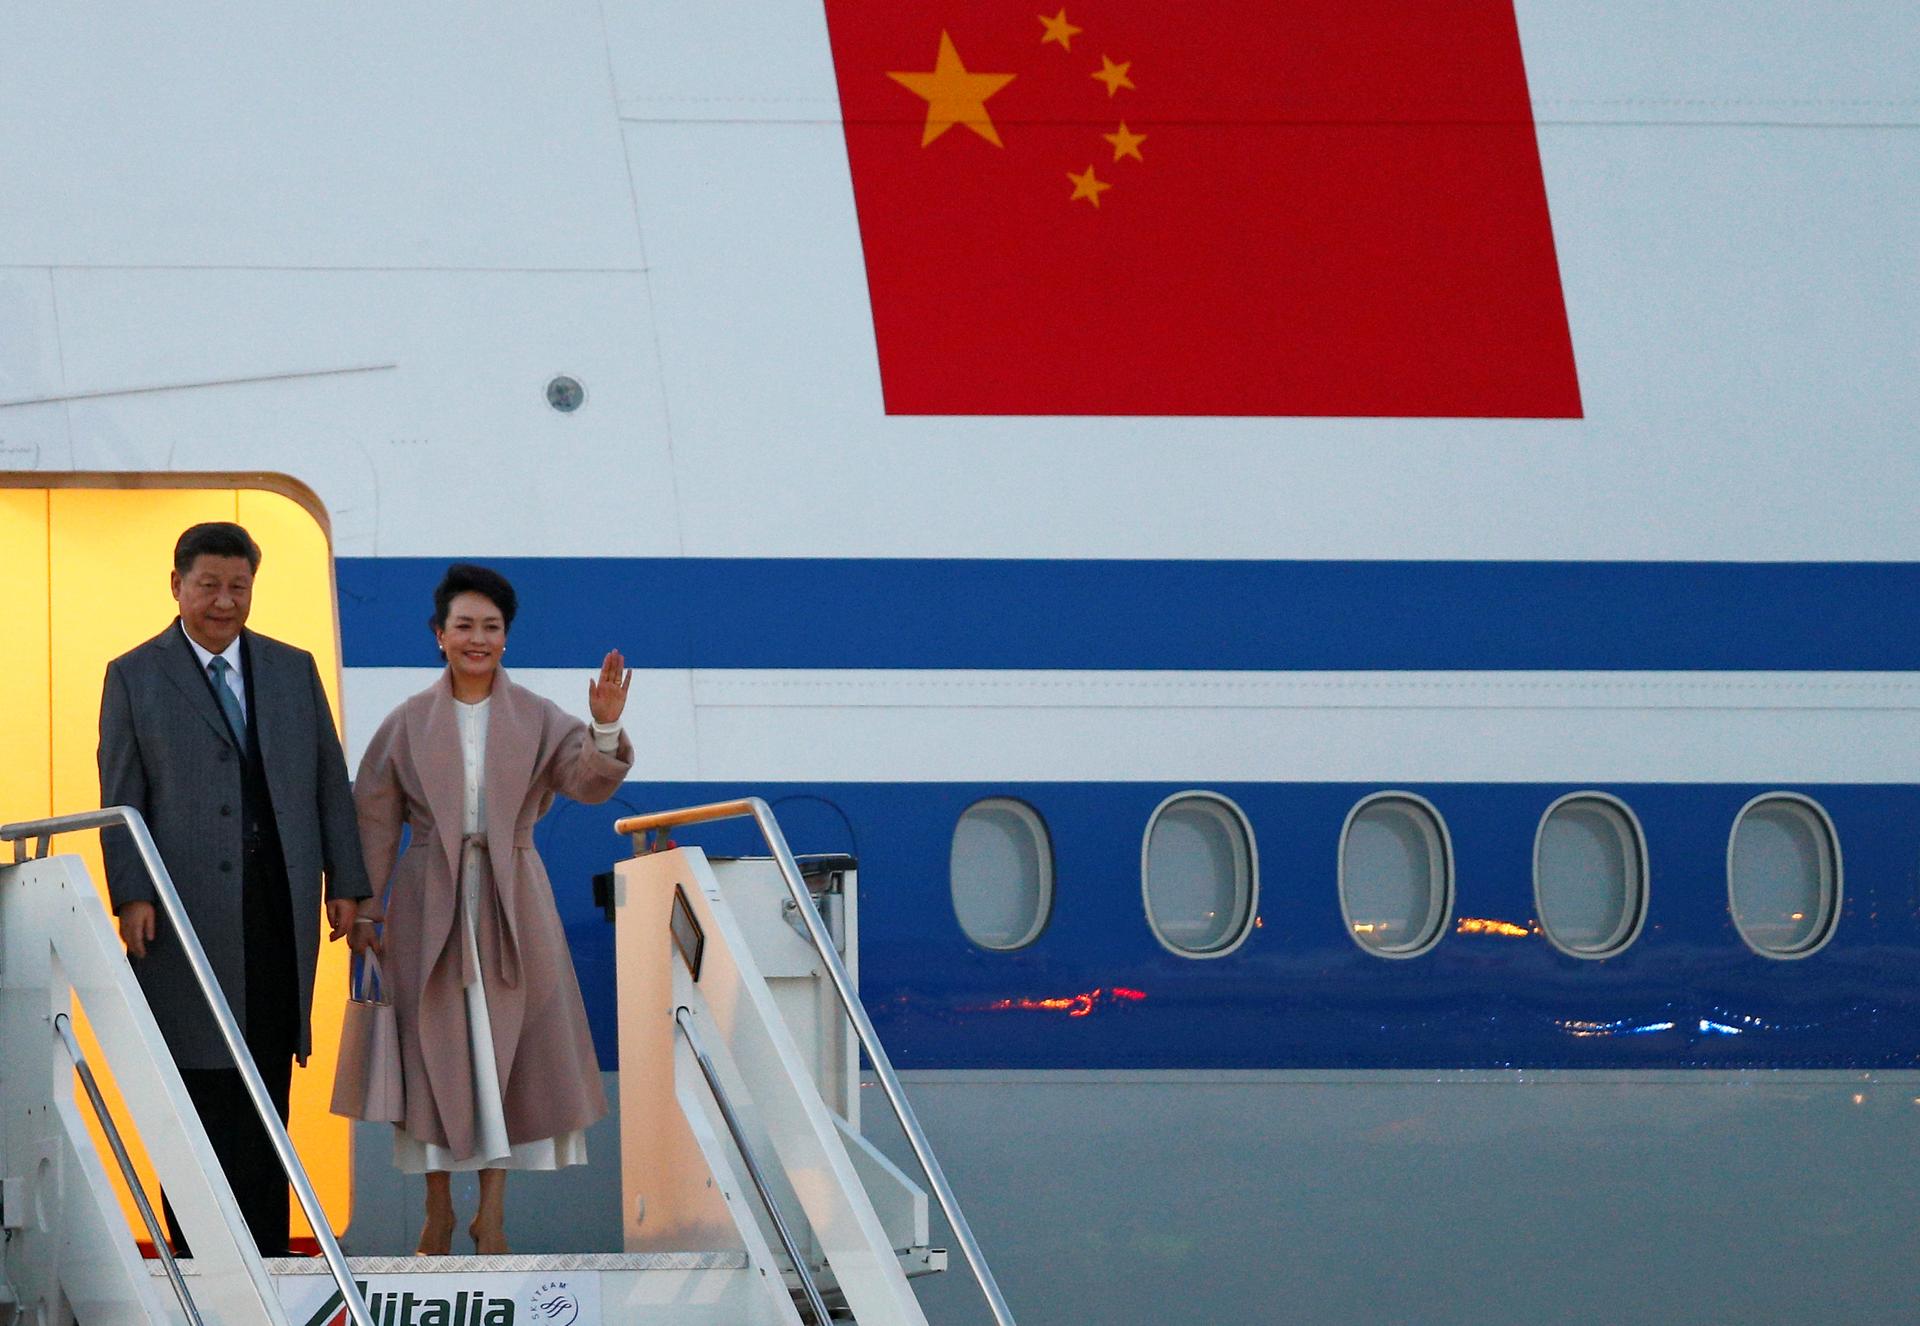 Xi Jinping and his wife step down from an airplane and wave.